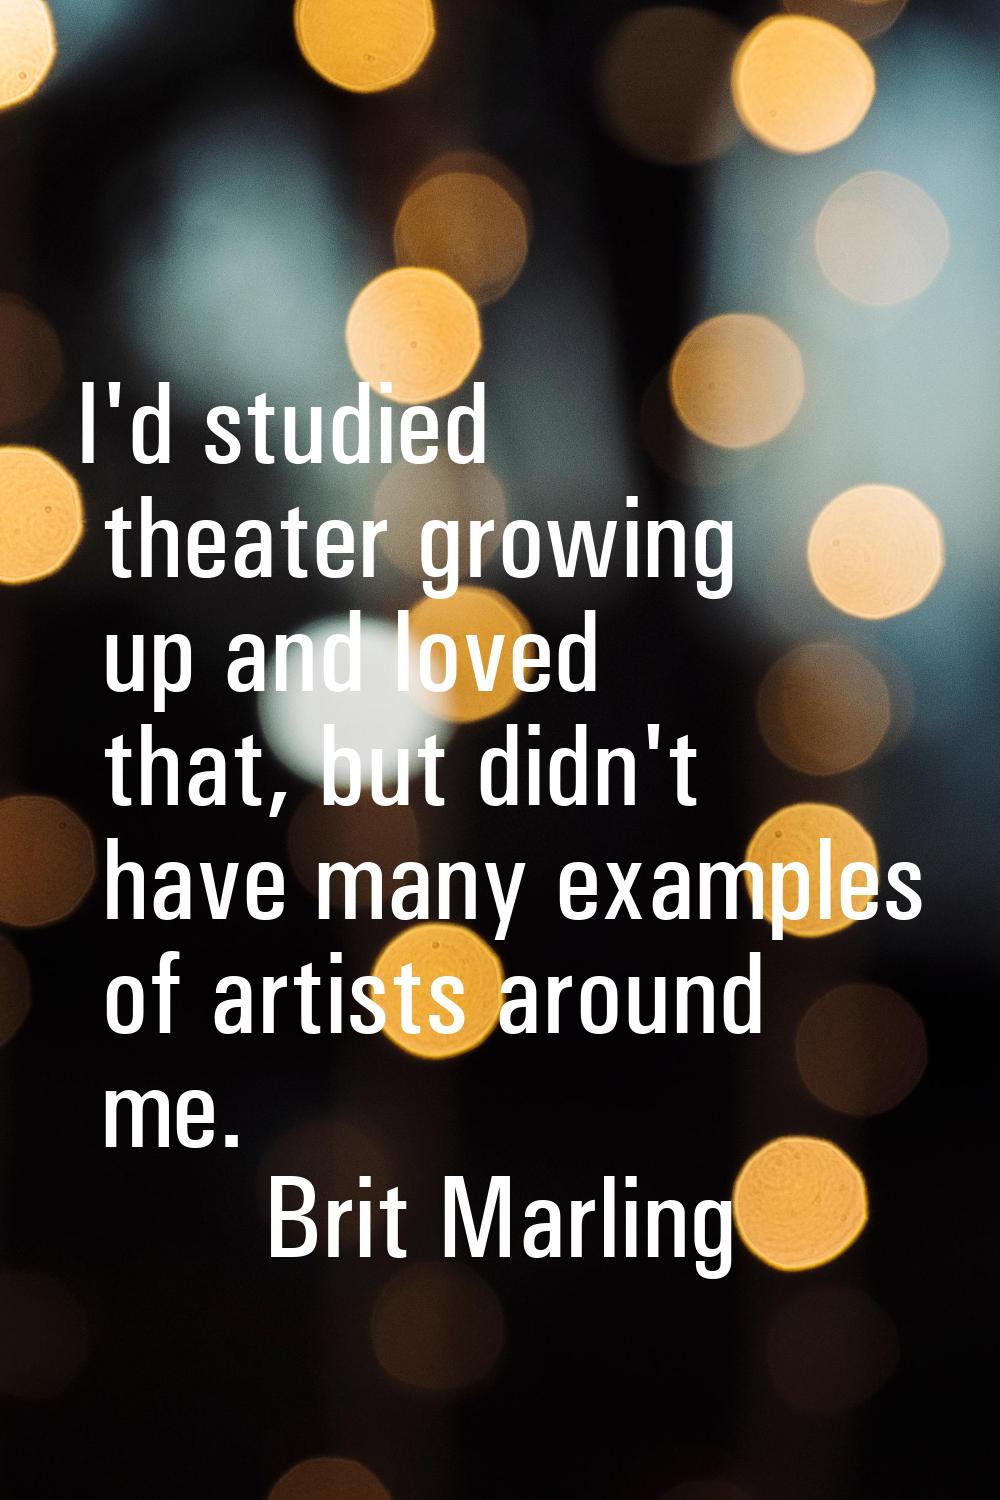 I'd studied theater growing up and loved that, but didn't have many examples of artists around me.